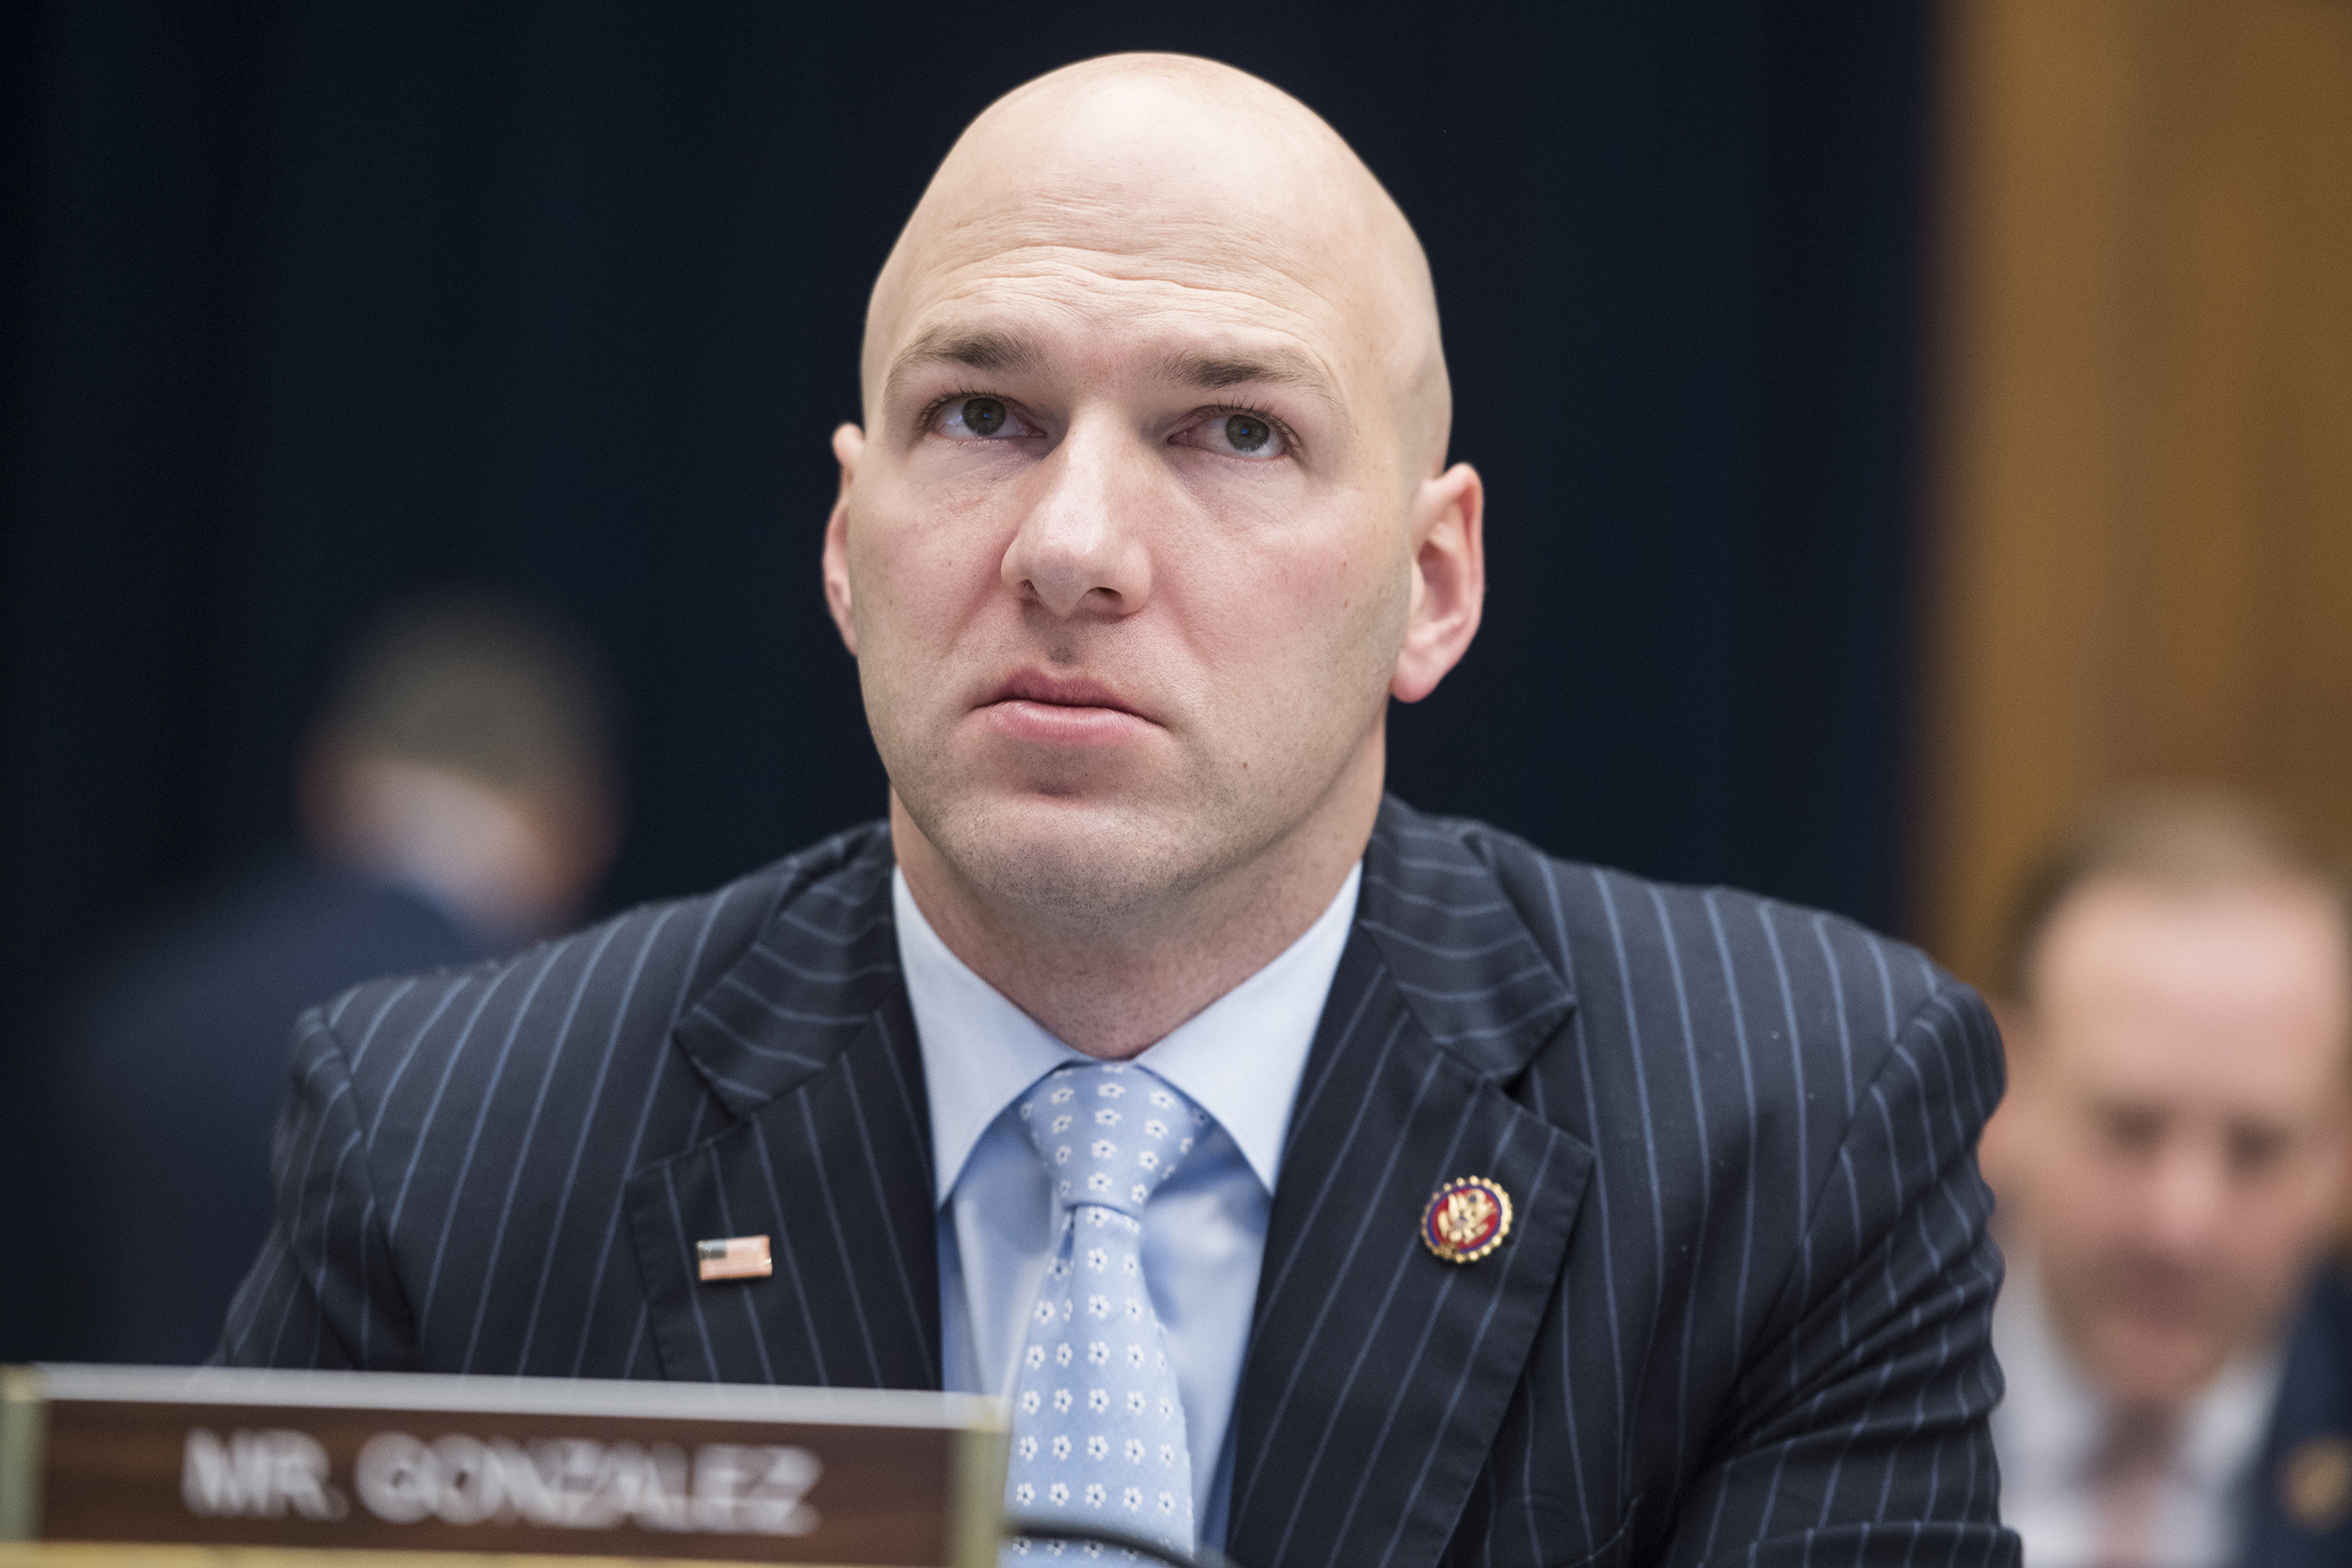 Anthony Gonzalez Congress Member a Star on the NFL What Team did He Play On?